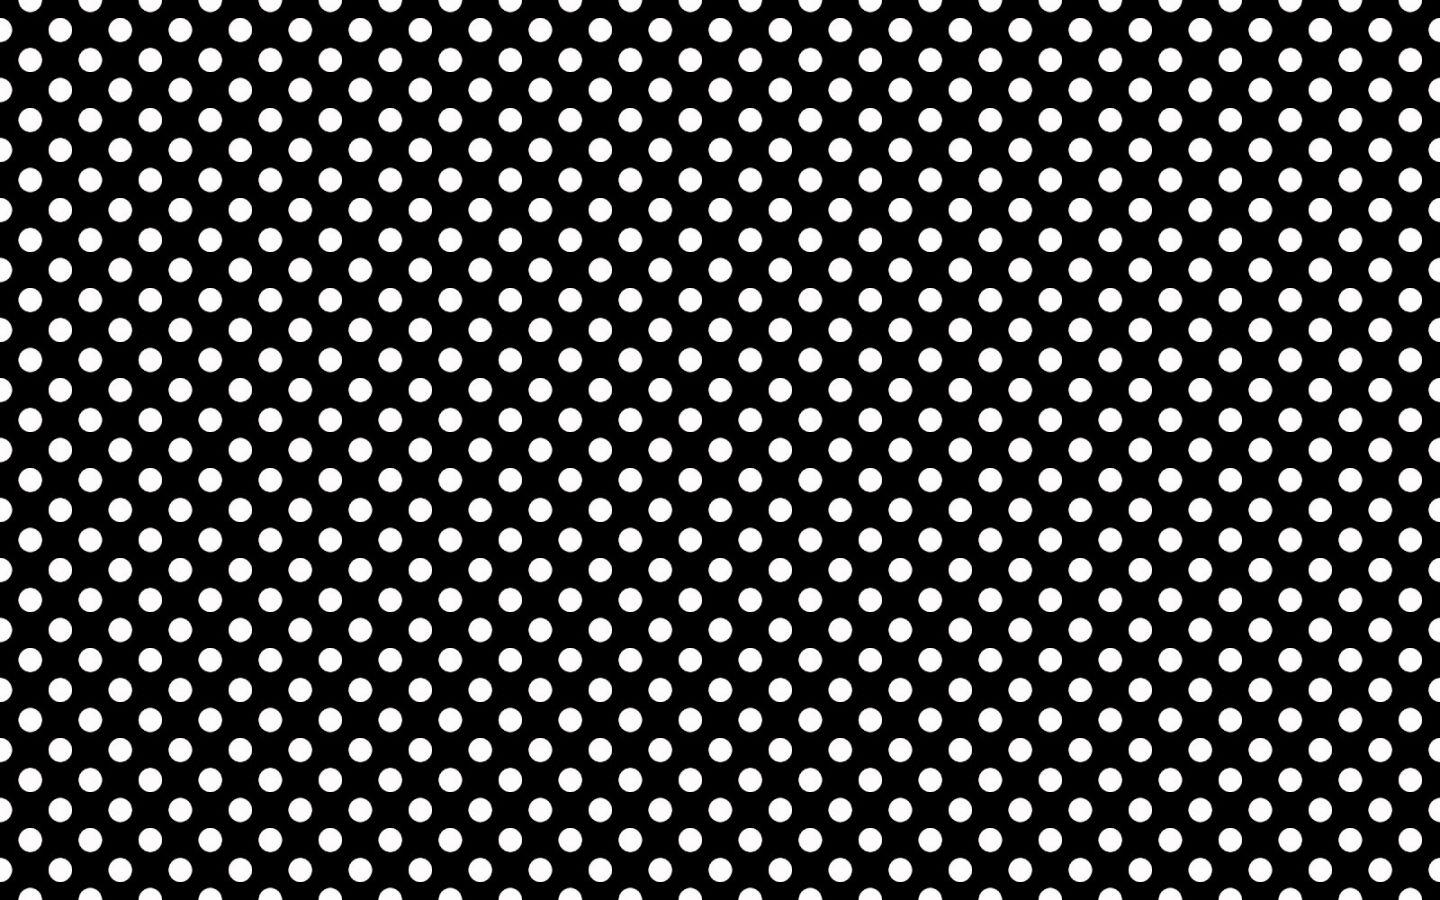 Featured image of post Aesthetic Black And White Polka Dot Wallpaper / Striped background background patterns black and white background textures patterns print patterns printable scrapbook paper iphone background wallpaper computer backgrounds.